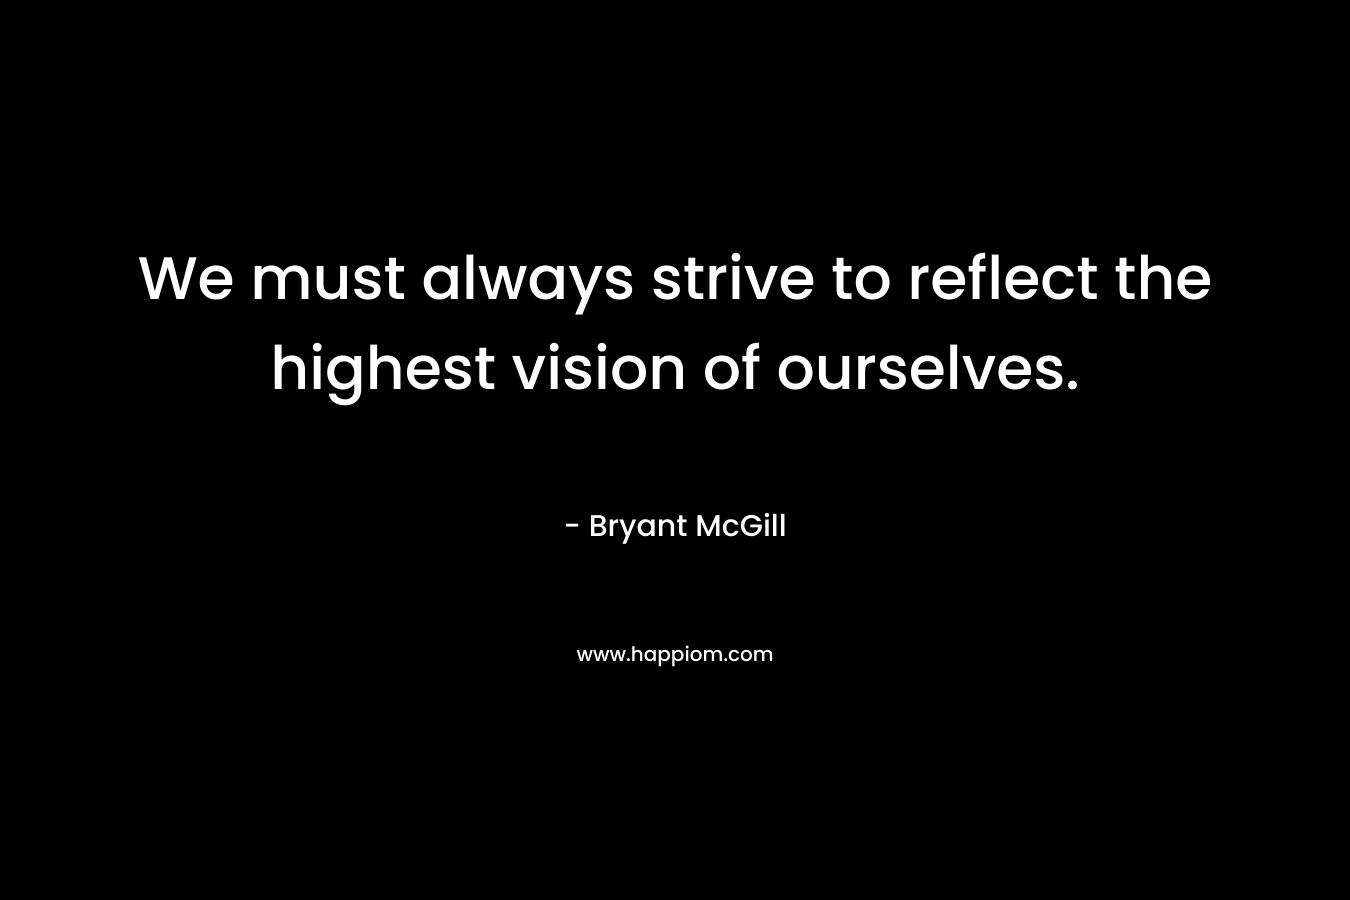 We must always strive to reflect the highest vision of ourselves.